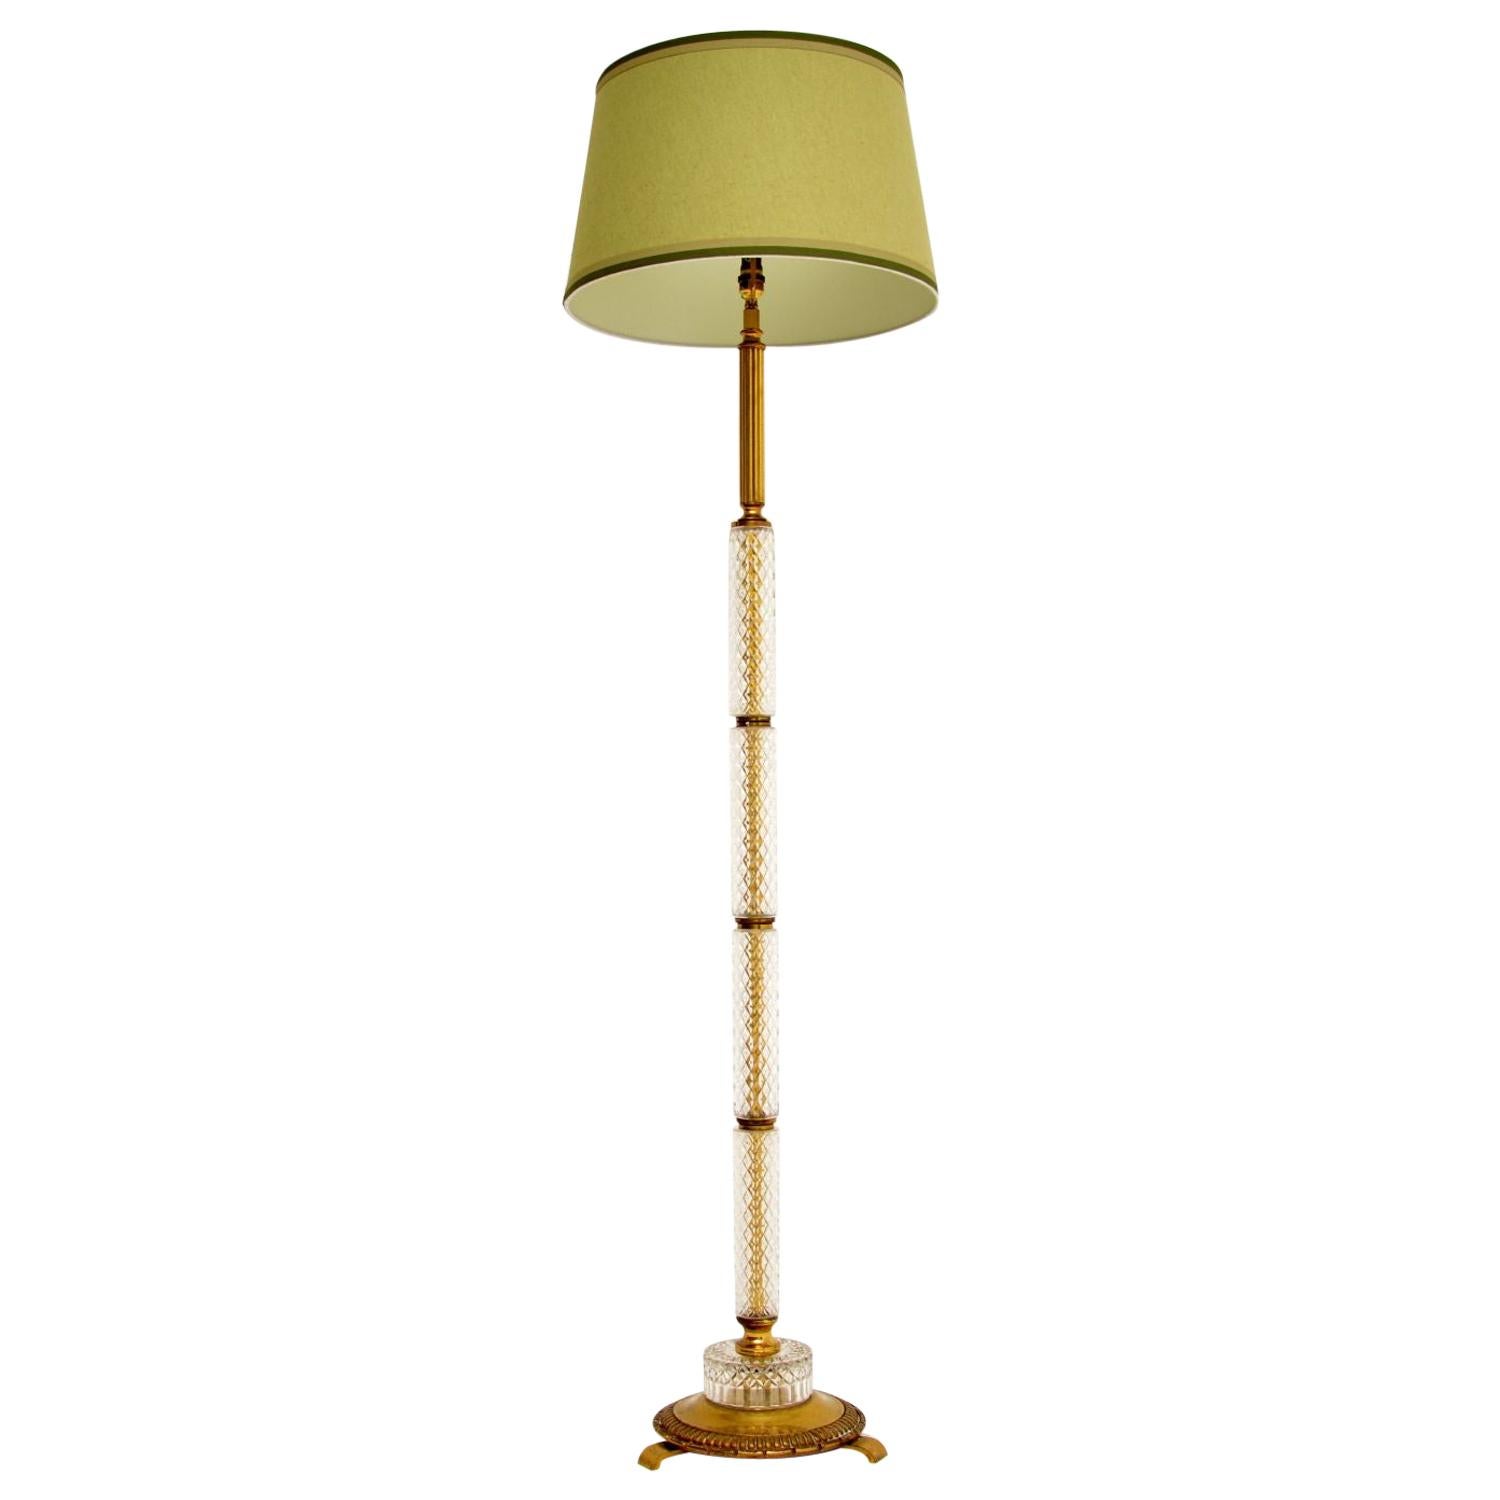 Antique Neoclassical Glass and Brass Floor Lamp